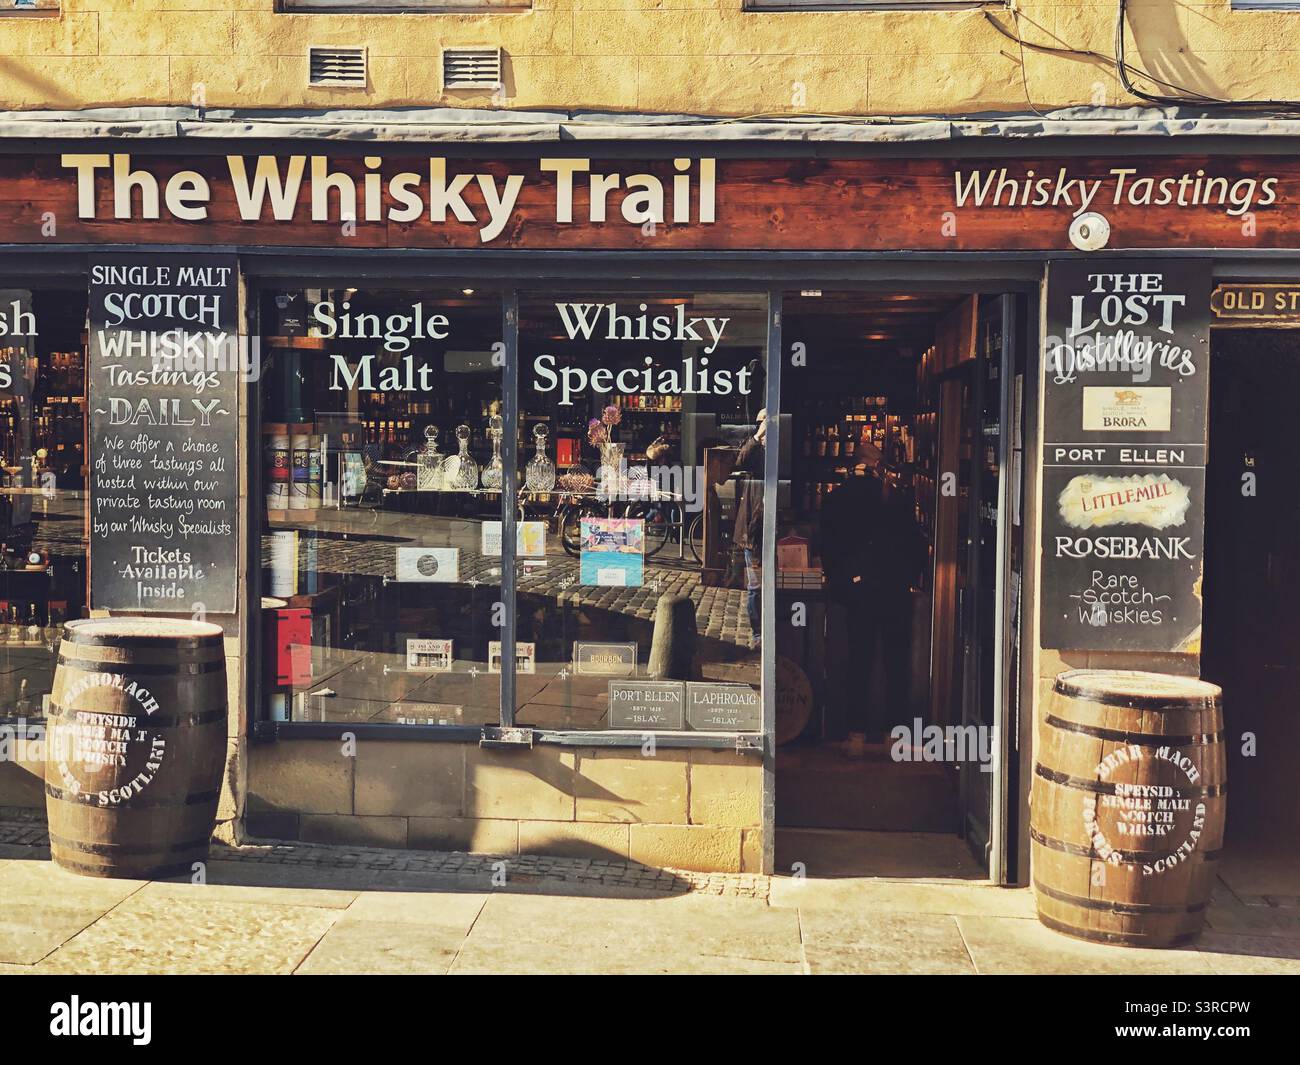 The Whisky Trail, Royal Mile, Edinburgh, Scotland. Bottle shop offering popular and hard to find Scottish whisky brands, plus beer, wine and glassware. Stock Photo